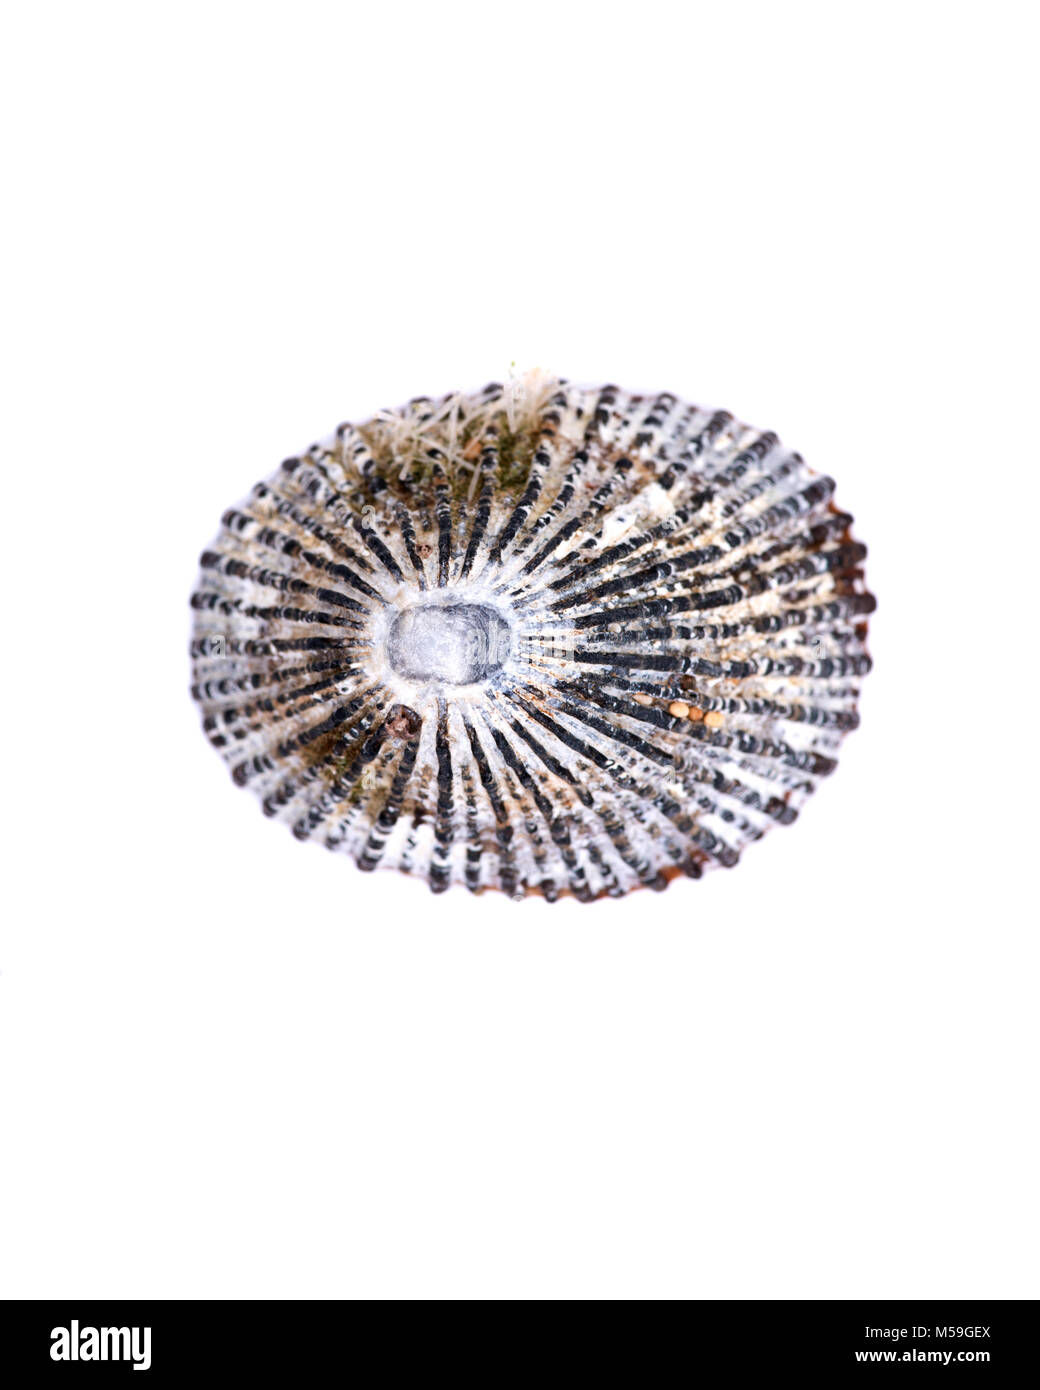 Cayenne Keyhole Limpet from Kauai beach in Hawaii, isolated on white background Stock Photo